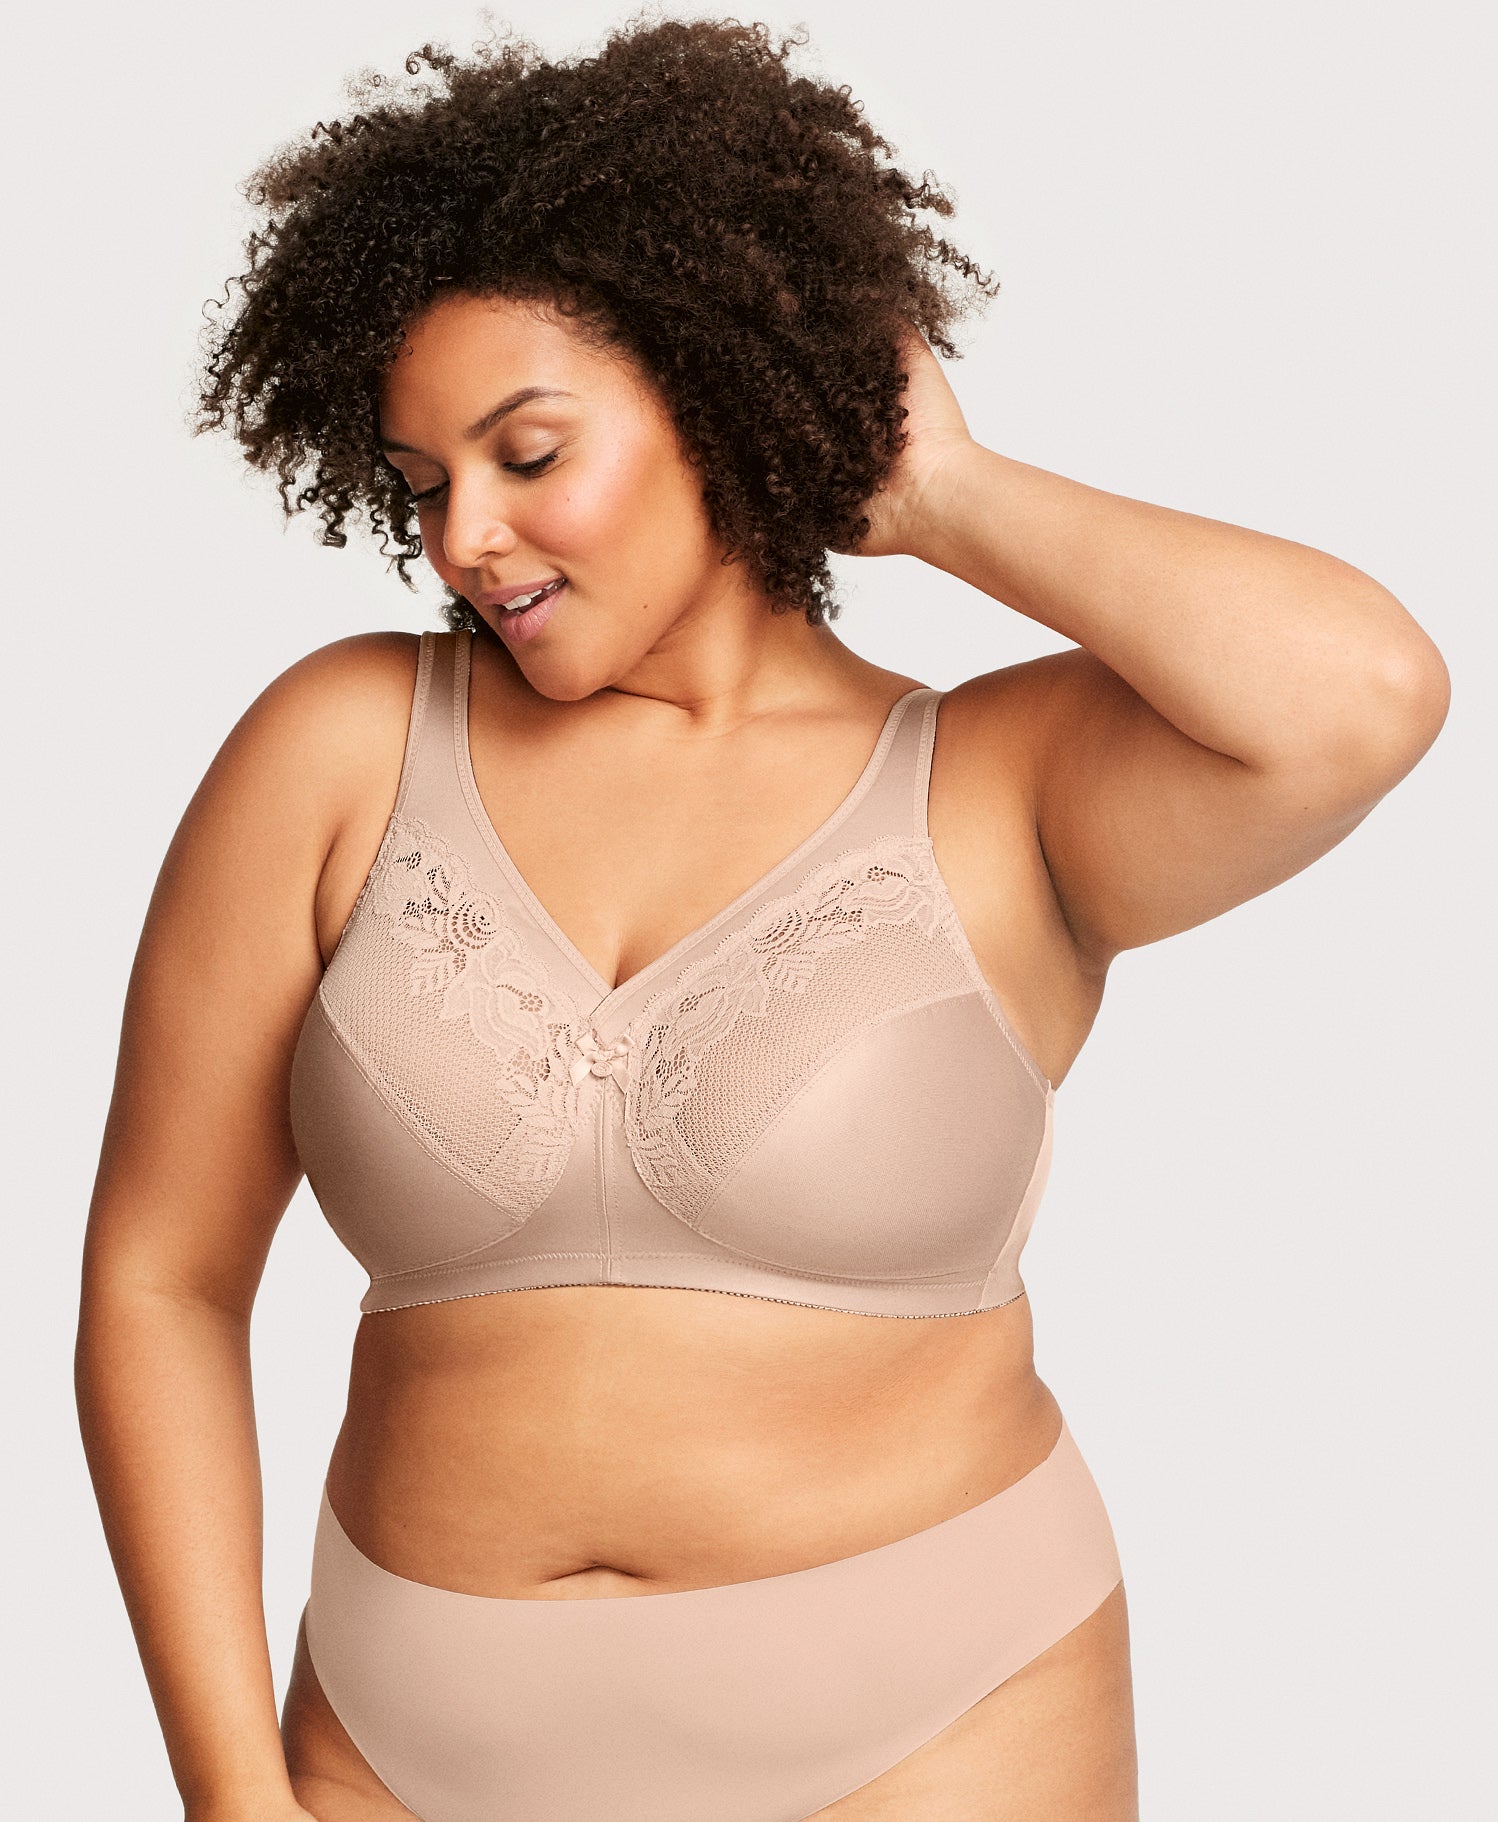 Full Cup Plus Size Lace Bra with Wire. Plus Size Clothes Online